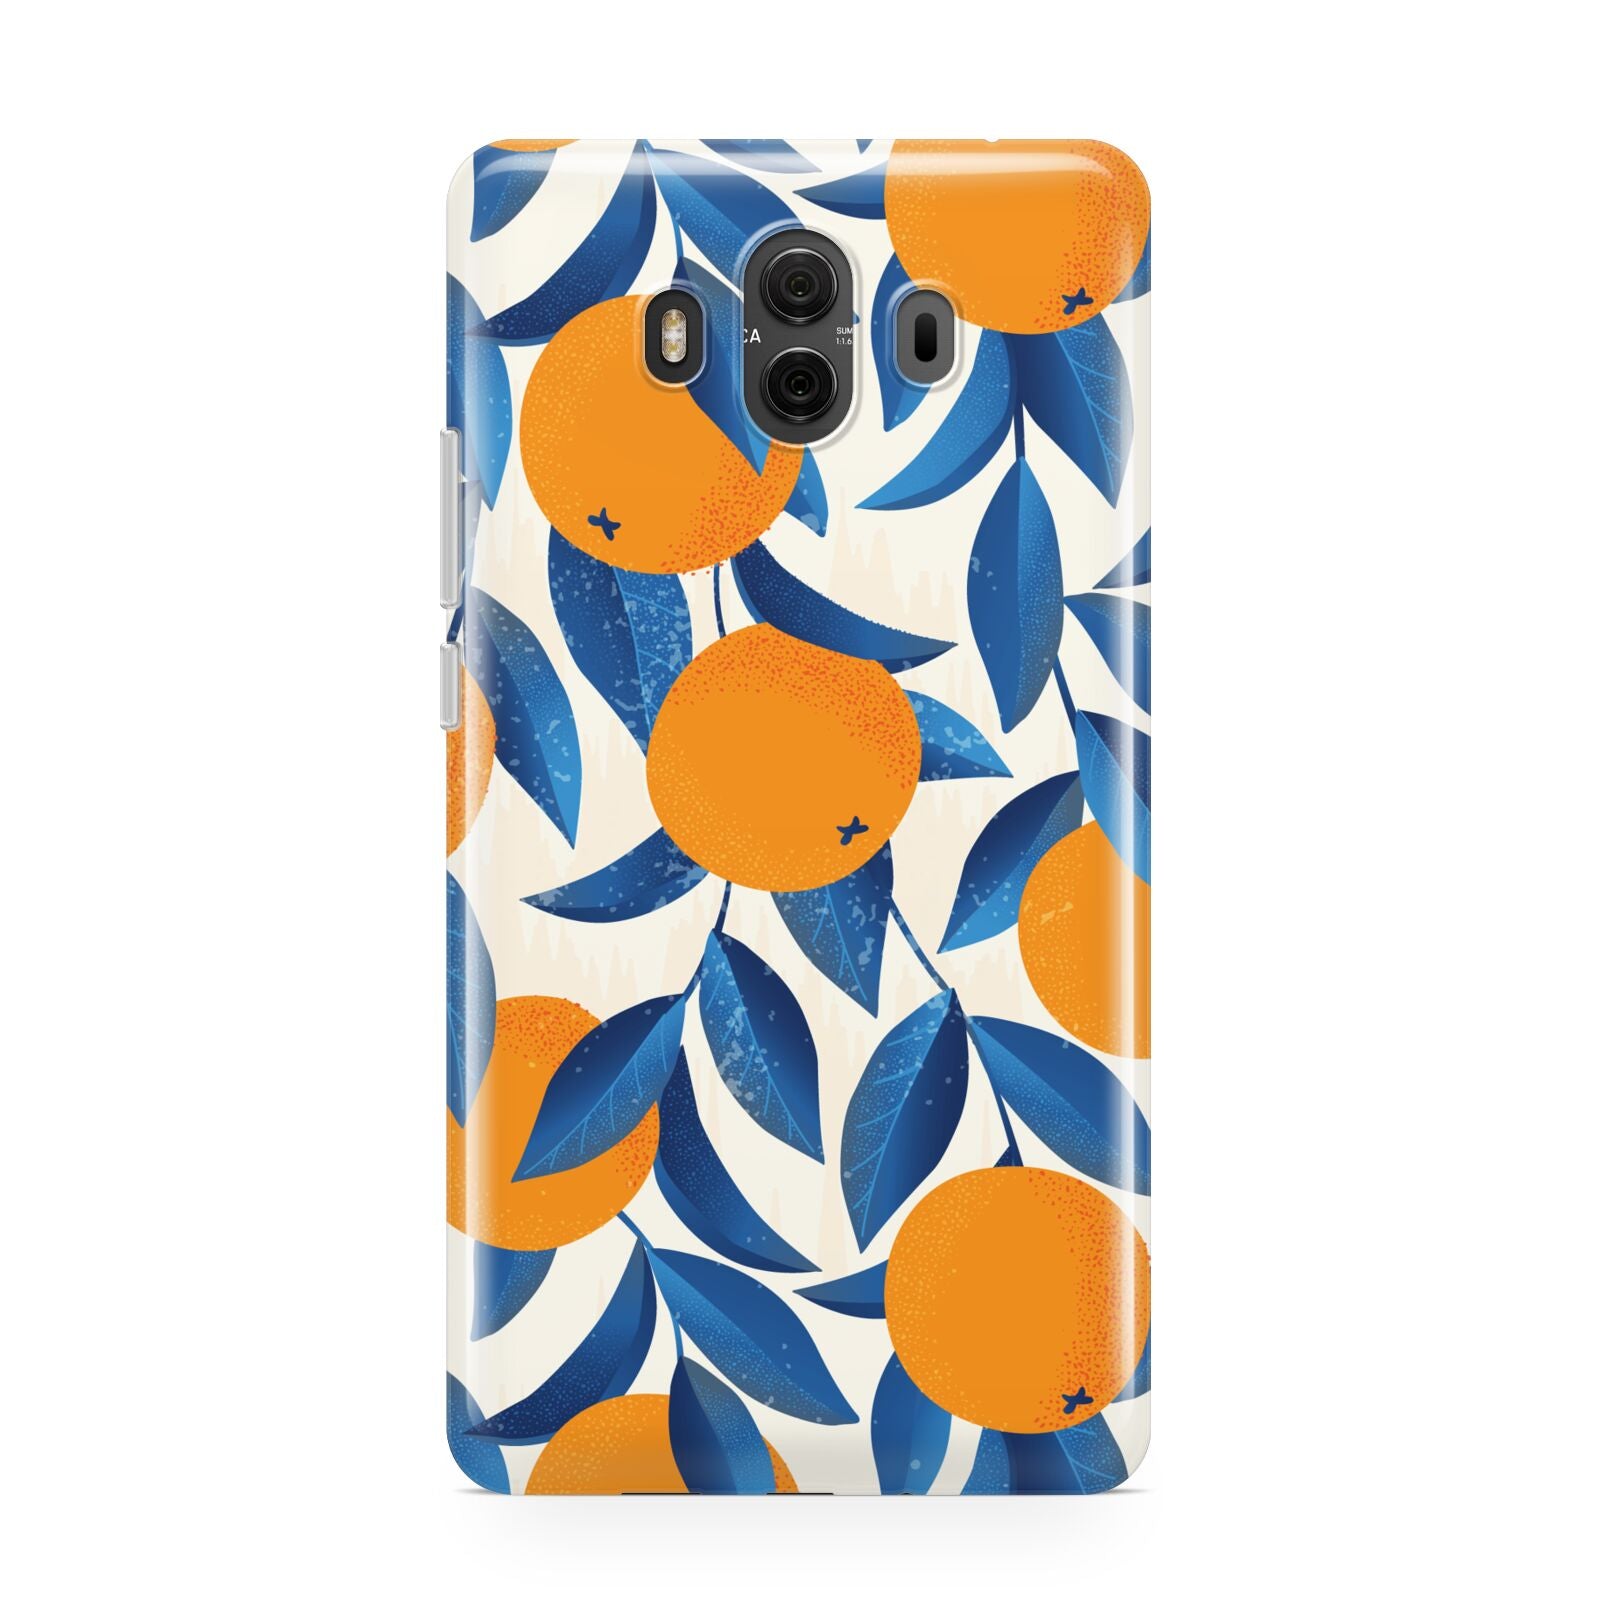 Oranges Huawei Mate 10 Protective Phone Case